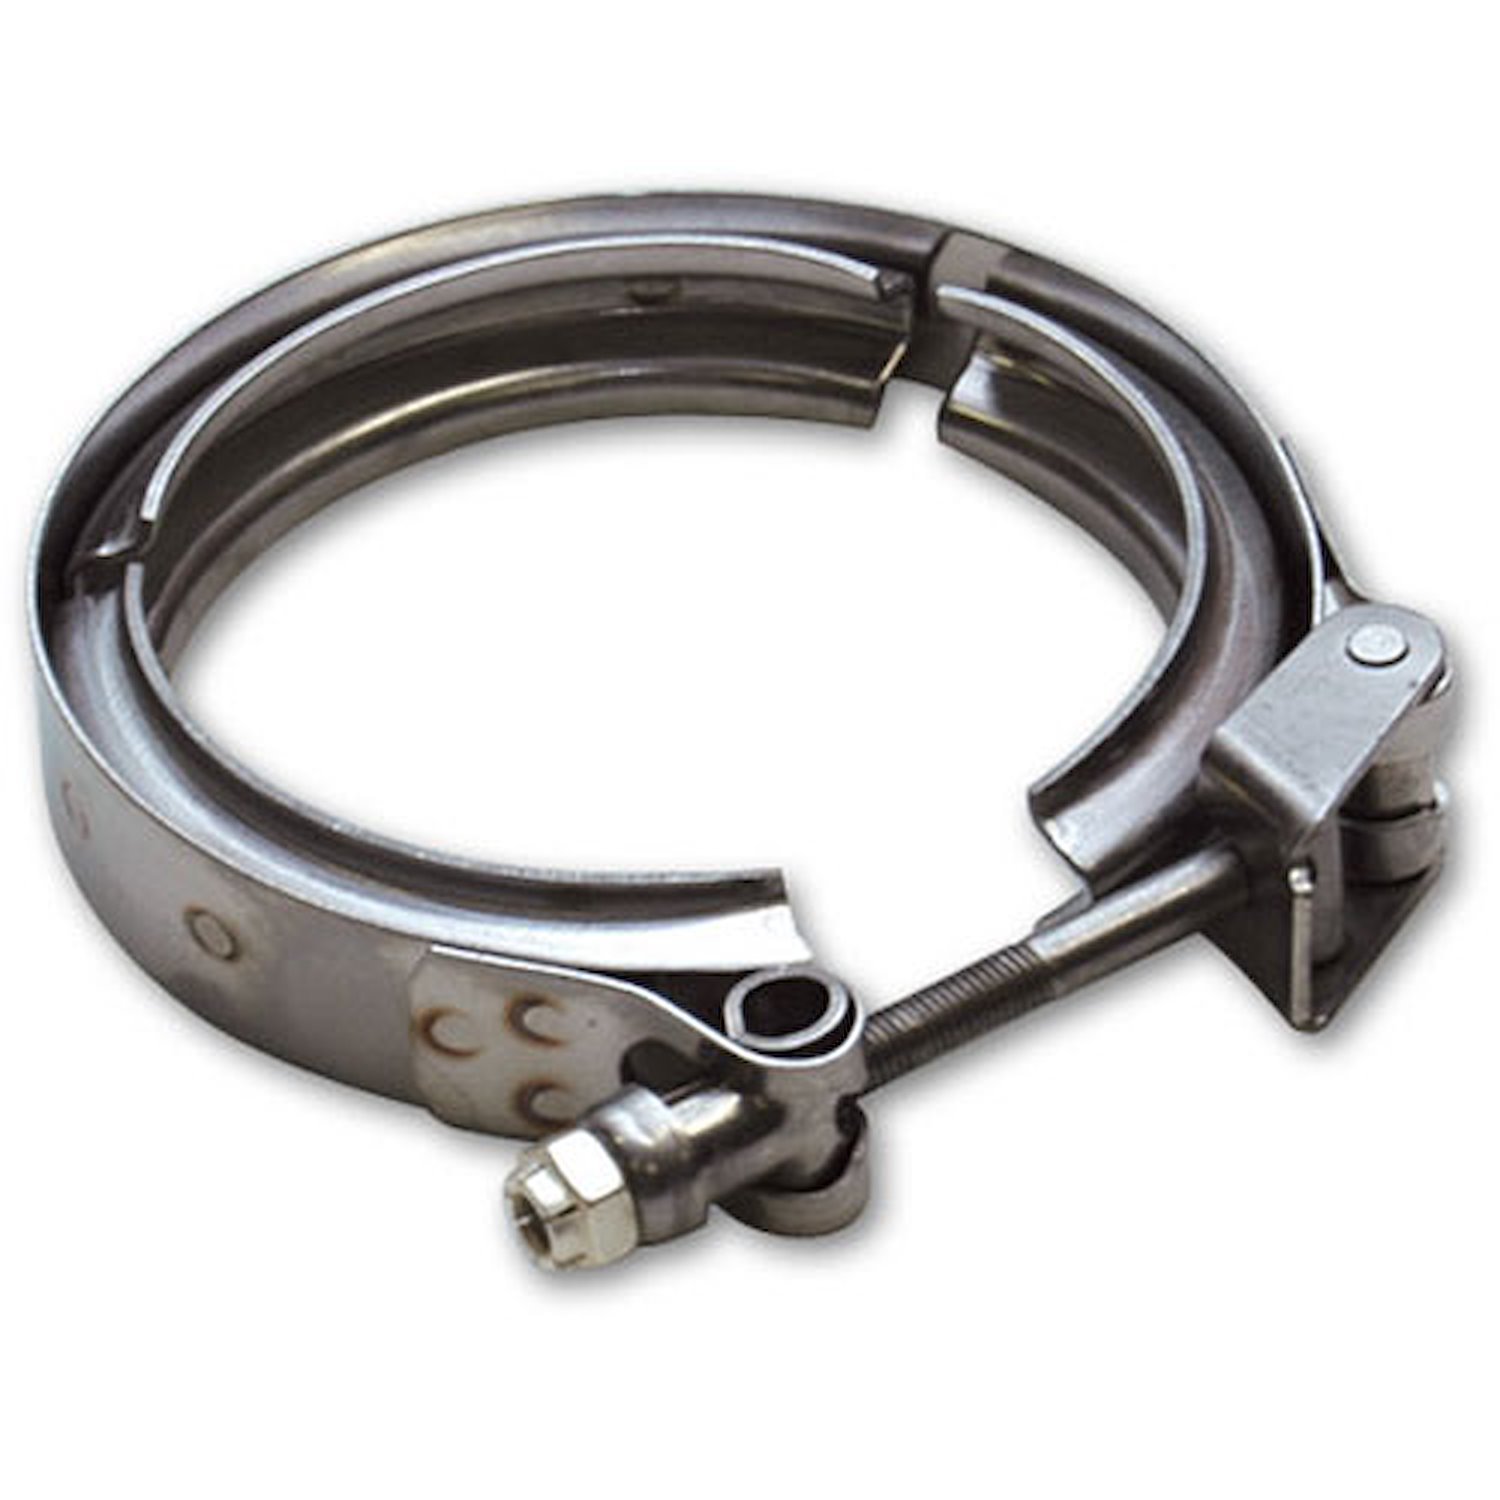 Quick-Release V-Band Clamp For V-Band Flanges up to 5.75" OD